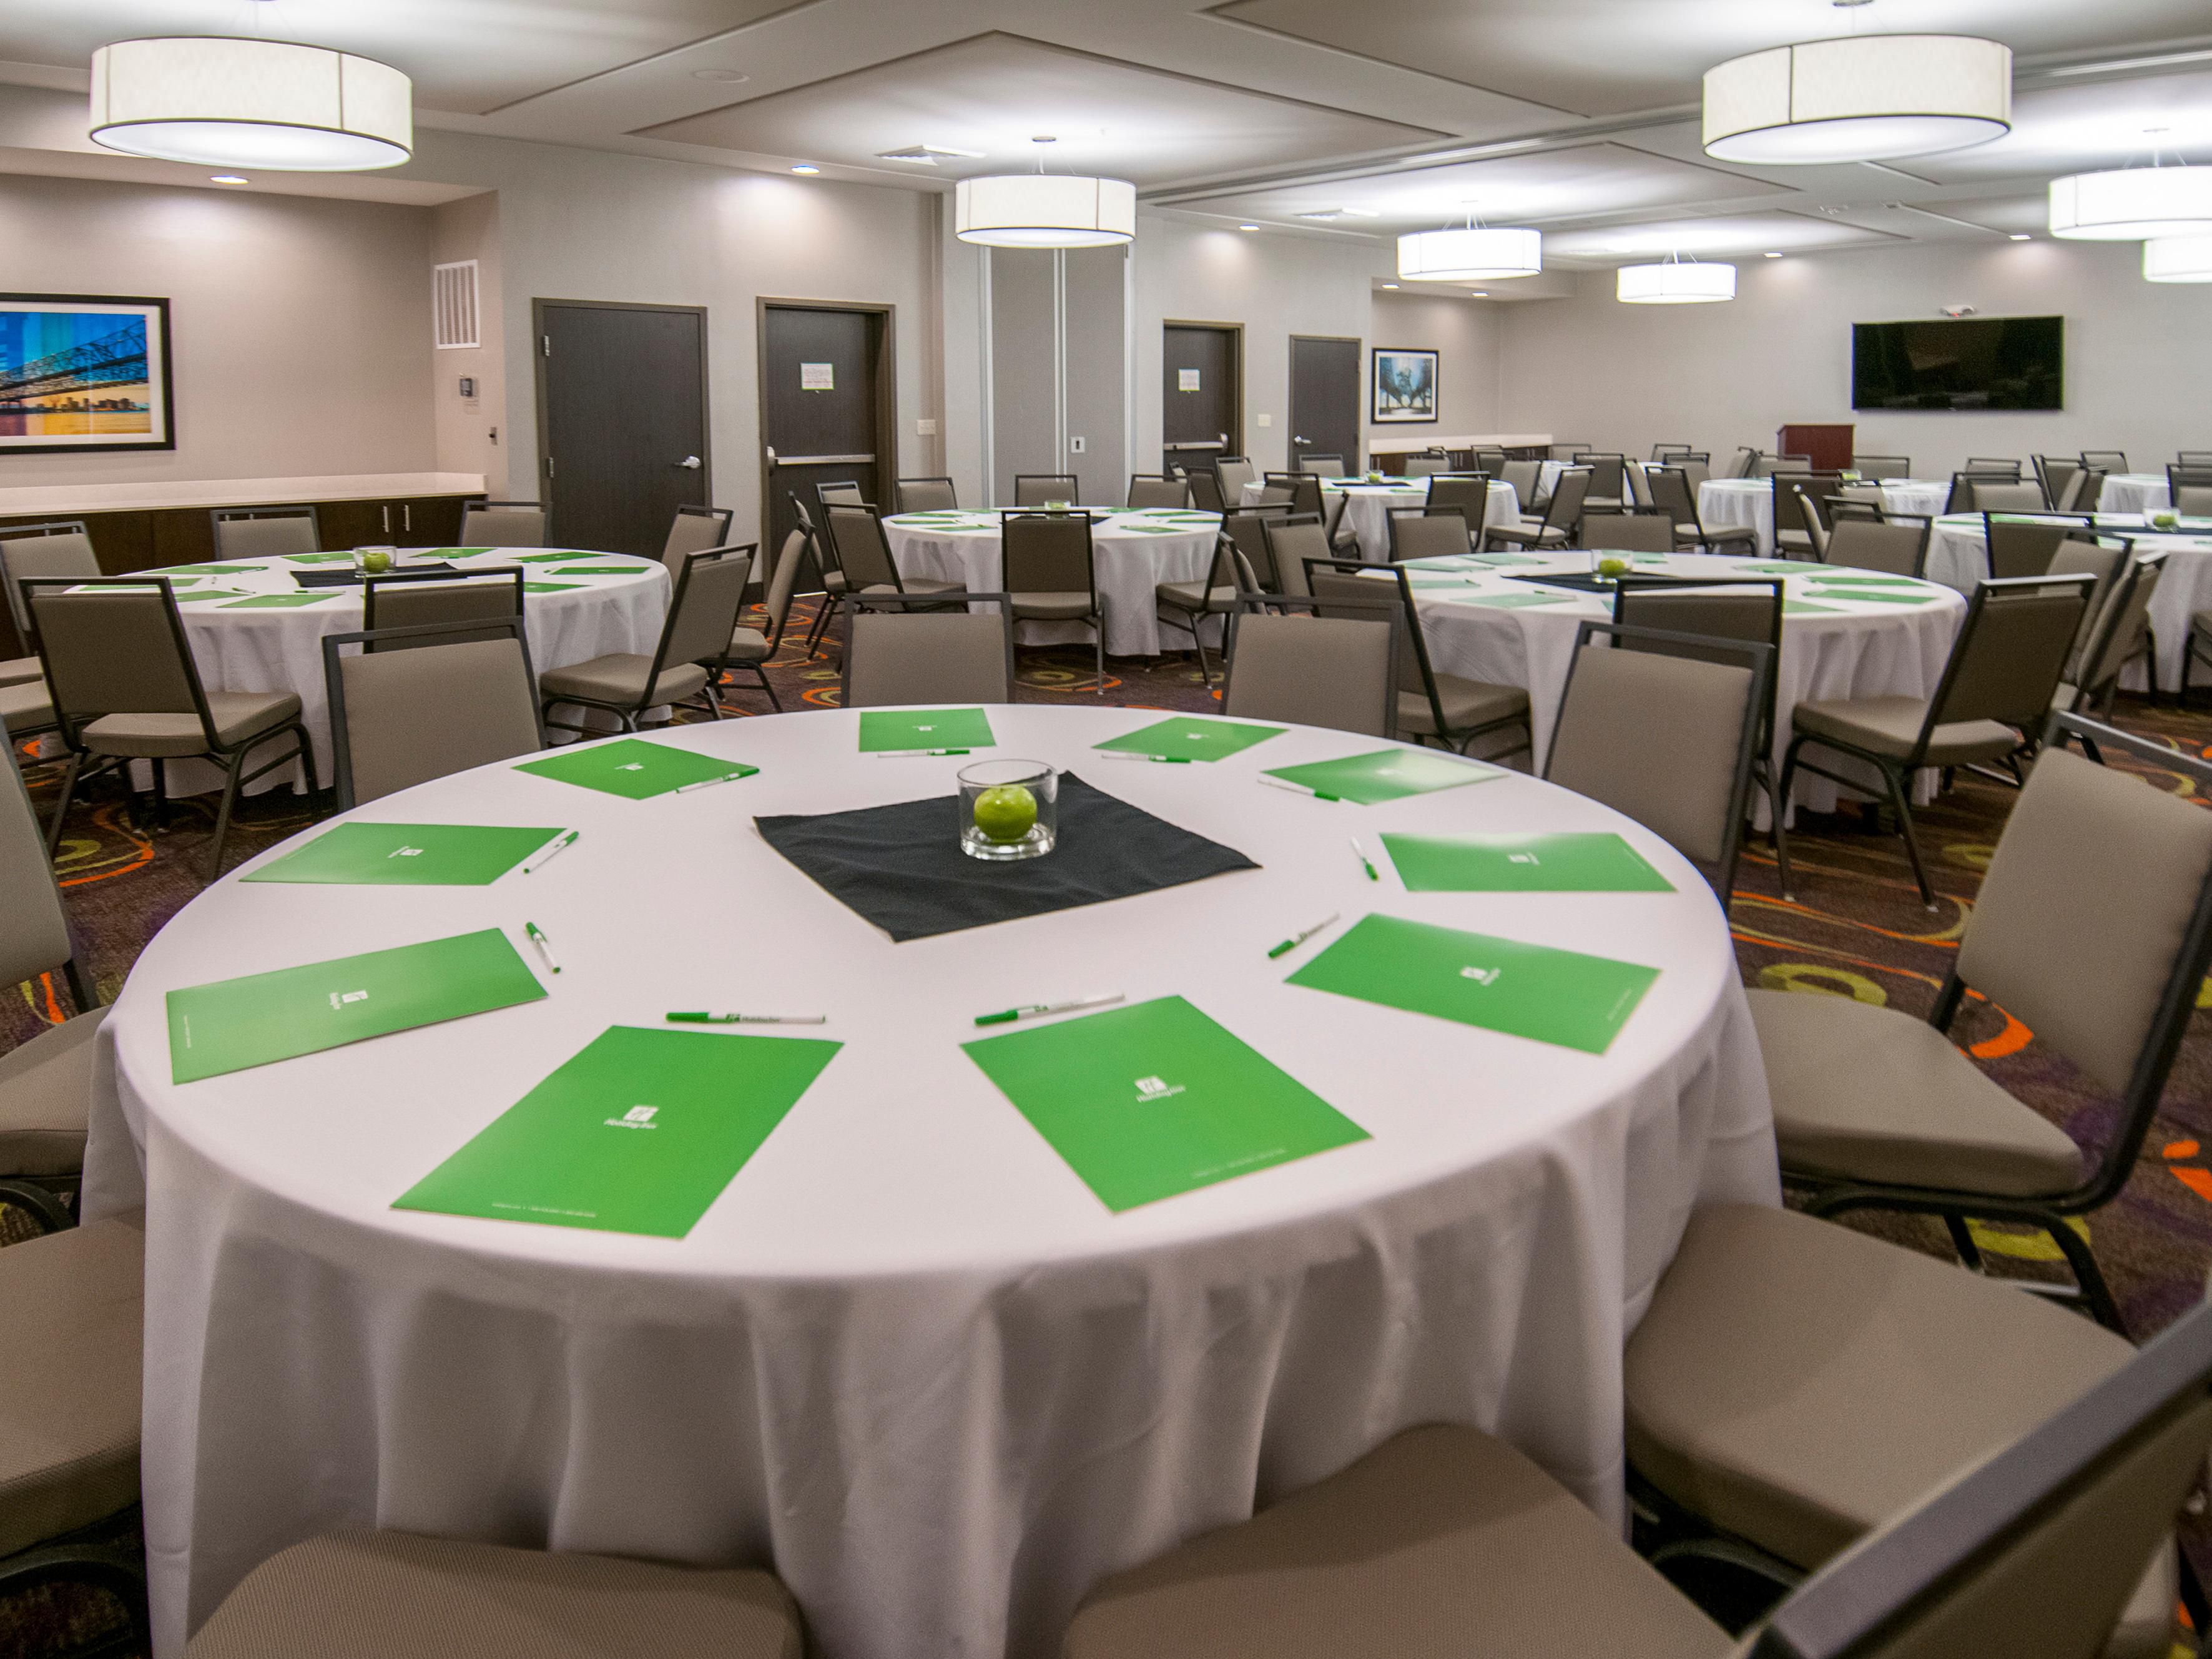 We have 1,300 sq.ft. of flexible meeting space that breaks into two sections. 70" TV panel with HDMI cord for laptop connection in both meeting rooms.  We are able to accommodate comfortably up to 40 guests with flexible meeting set ups.  We also have a wonderful Board Room meeting for any last-minute pop-ups! 